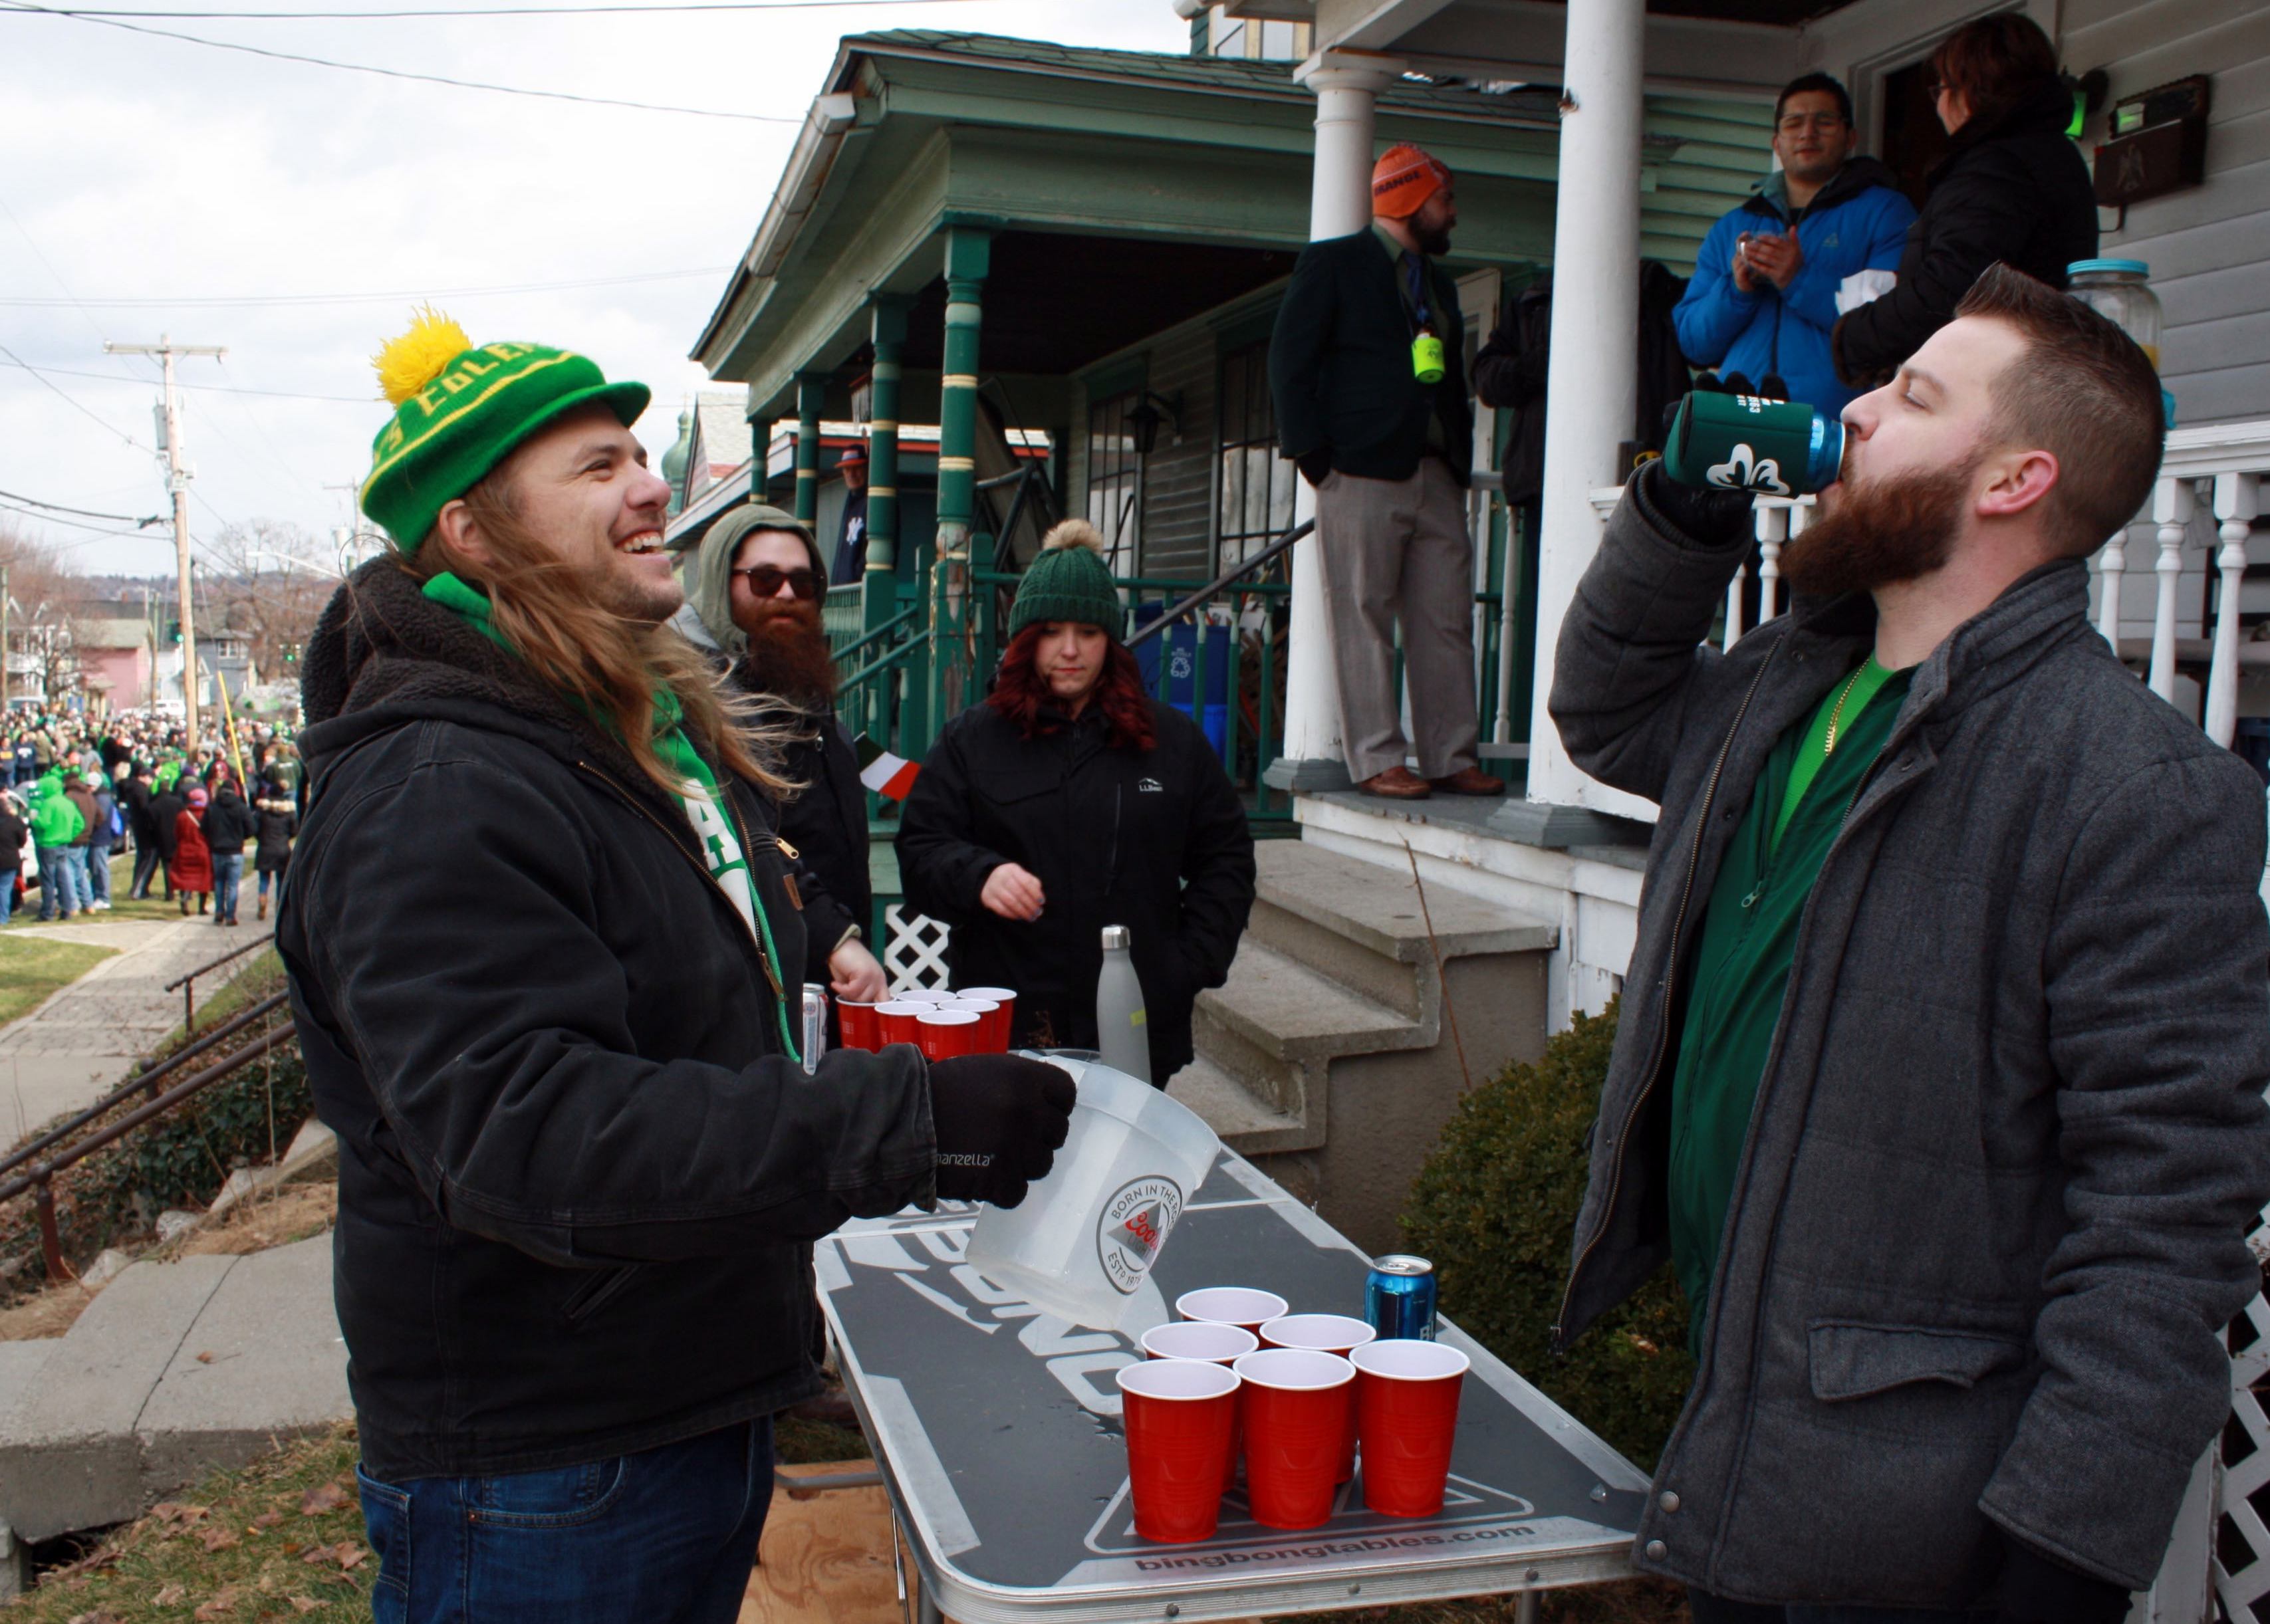 Aaron Meile (left) lives on the same street where the parade occurs, making his house perfect for pregaming. He shares a laugh with friend Joe Viviano between rounds of beer pong. 